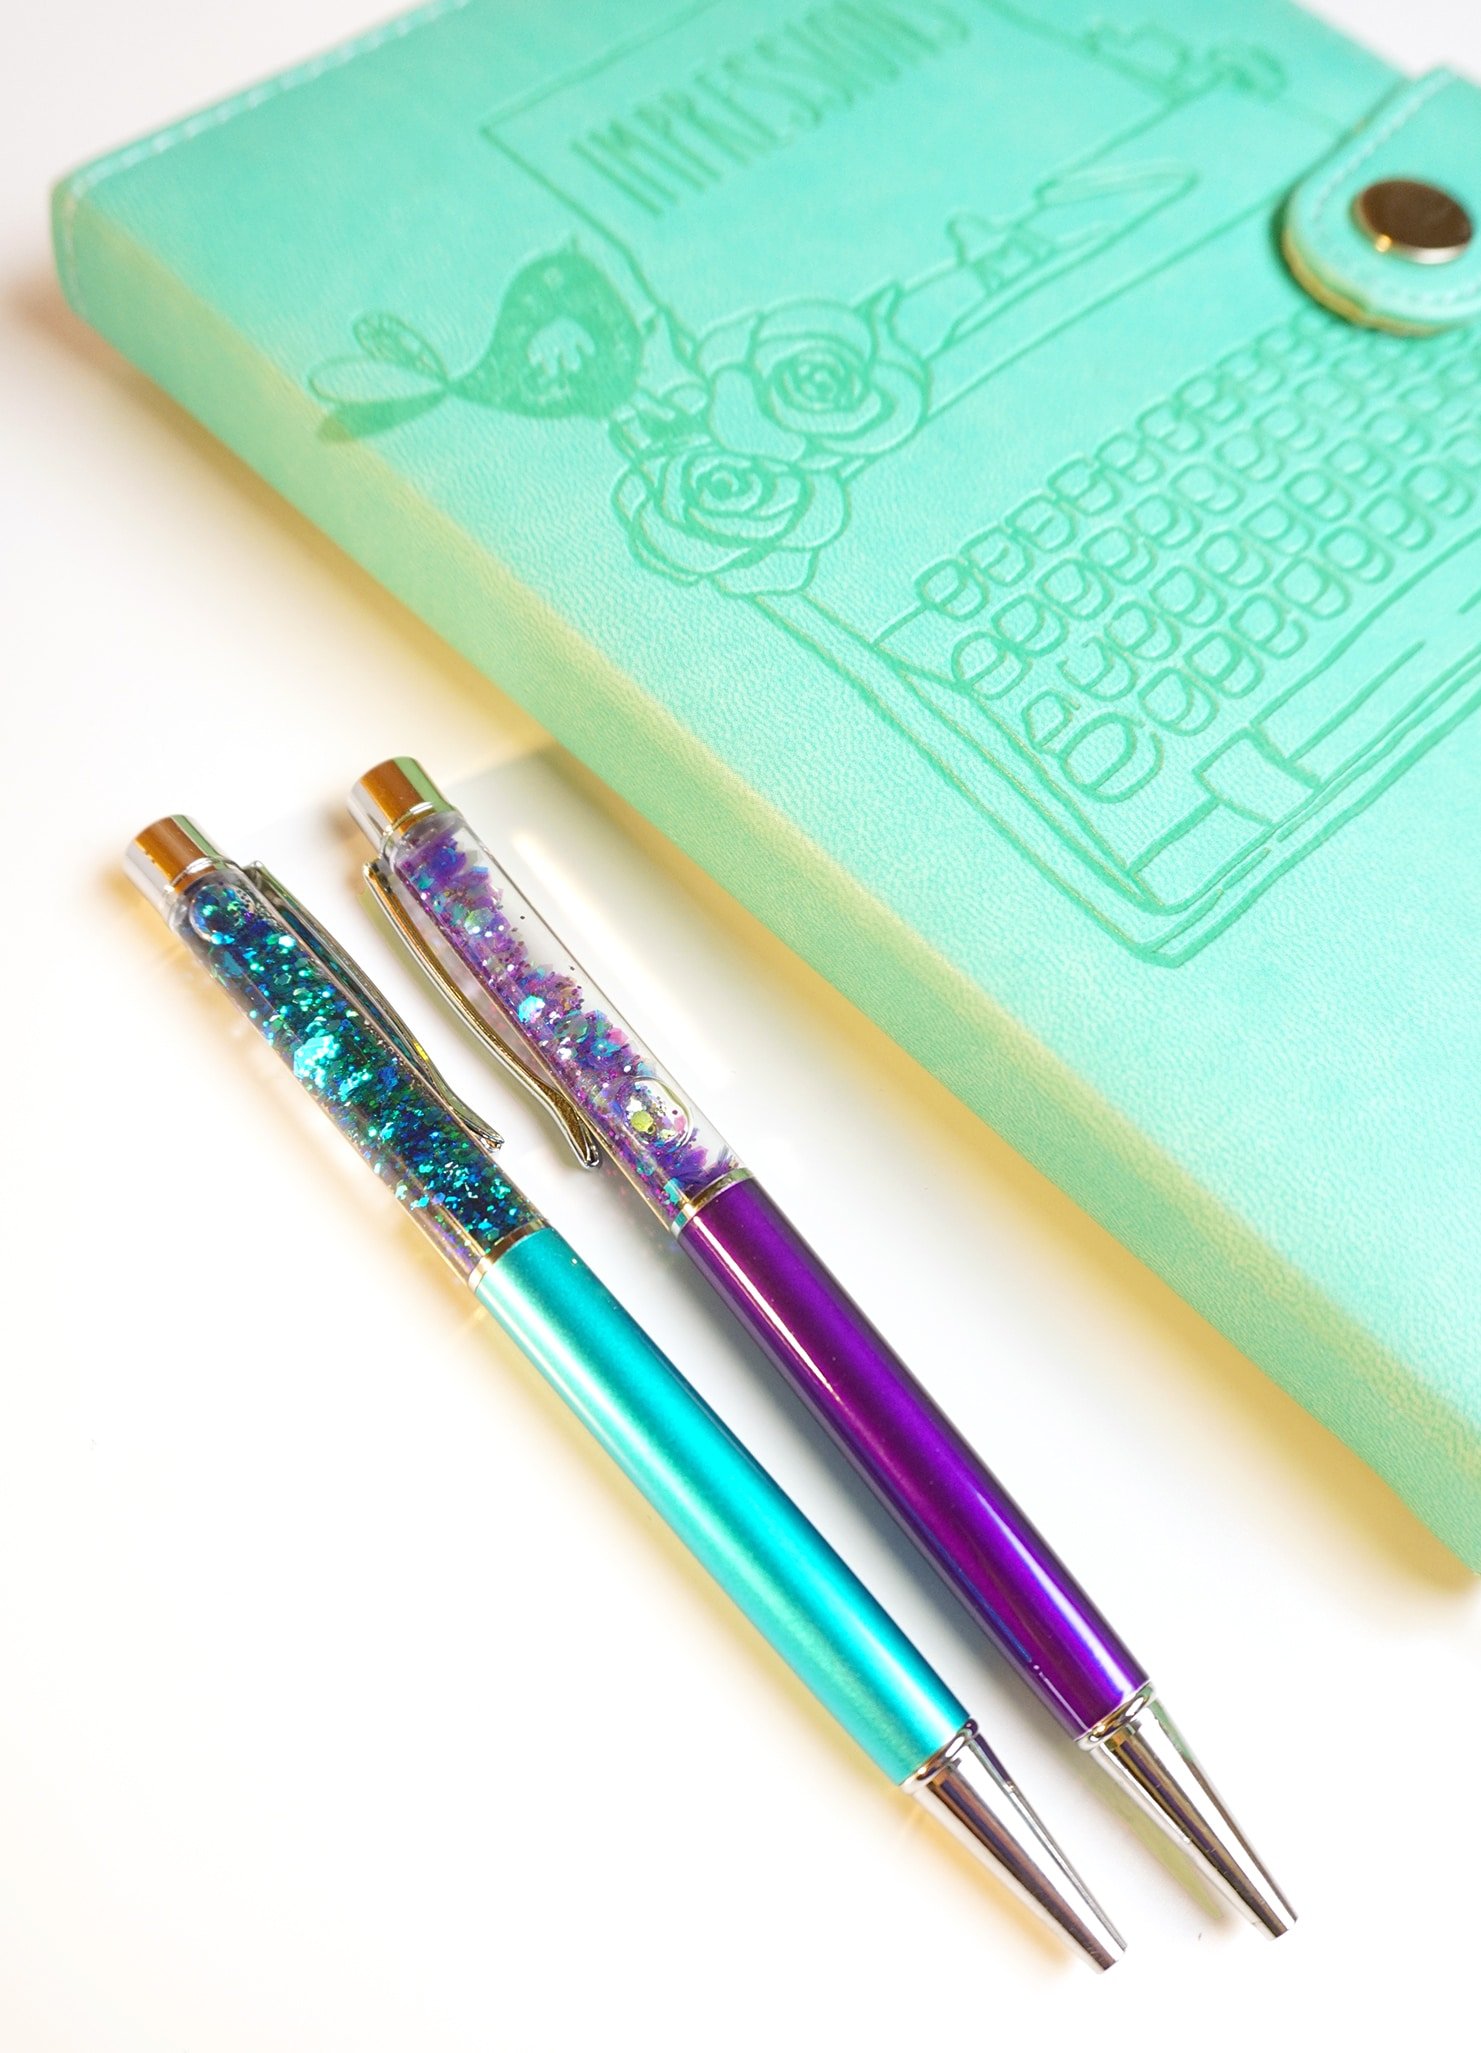 DIY glitter pens and stationary